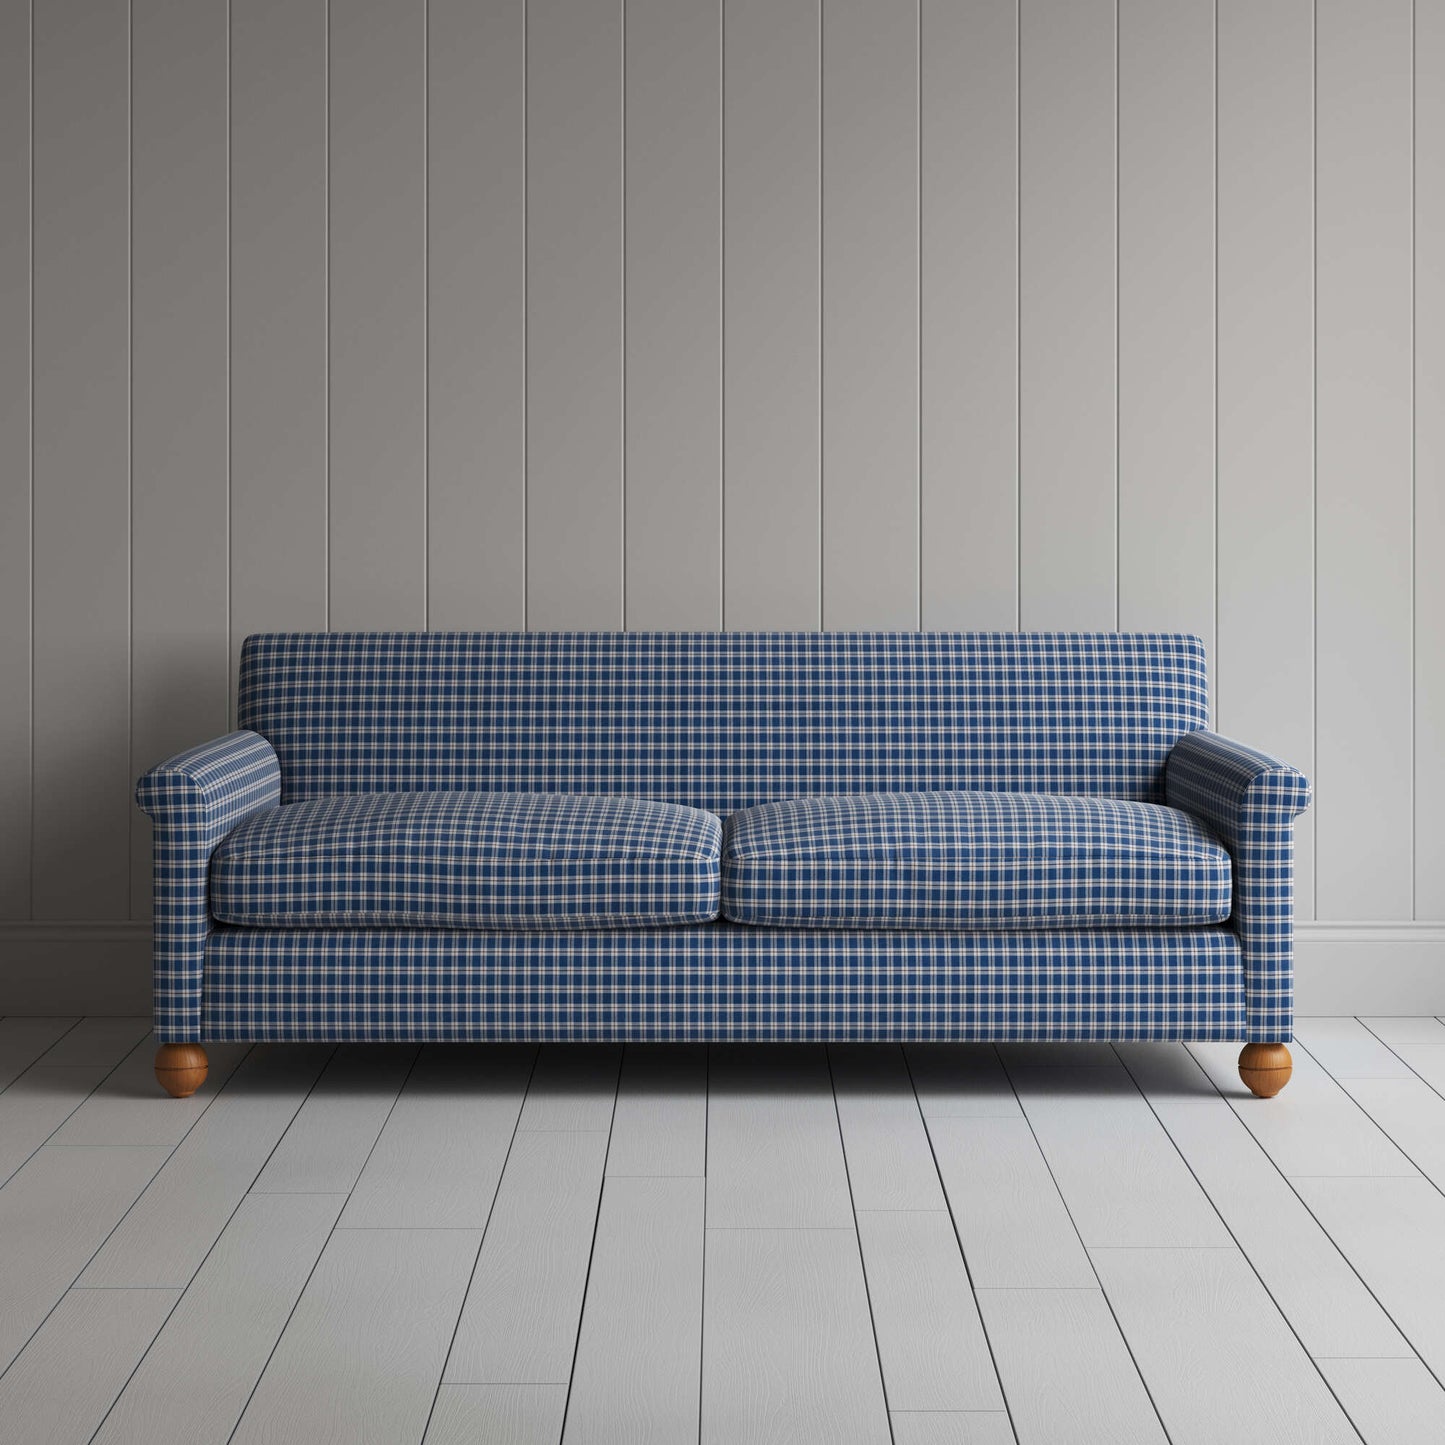 Idler 4 Seater Sofa in Well Plaid Cotton, Blue Brown